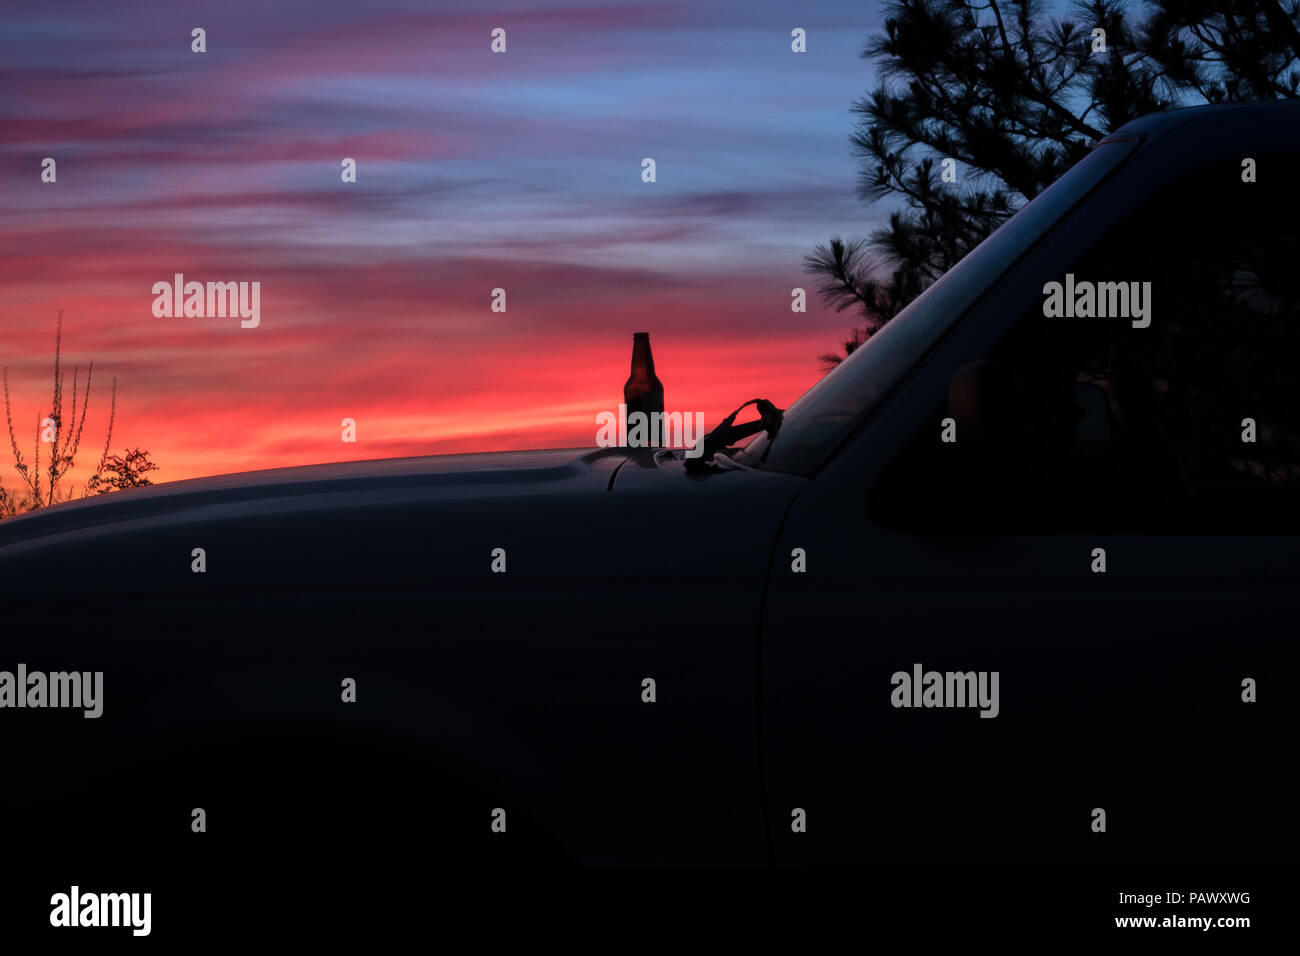 Sunset silhouette of beer bottle on the hood of a truck in the forest - Lake Tahoe Area, California Stock Photo